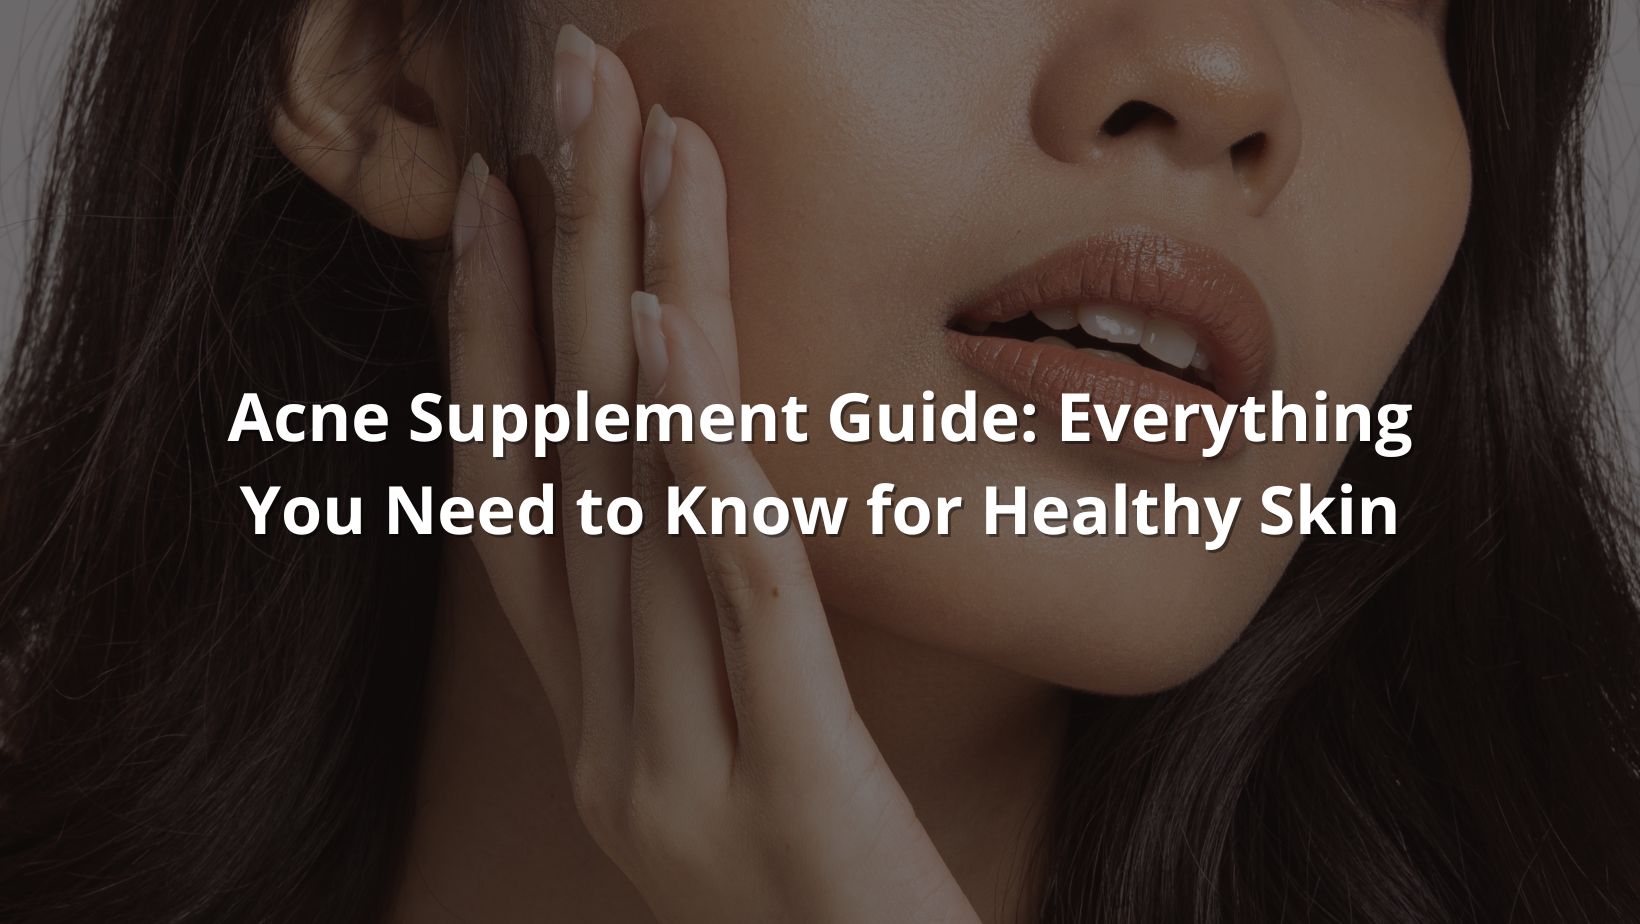 Acne supplement article featured image